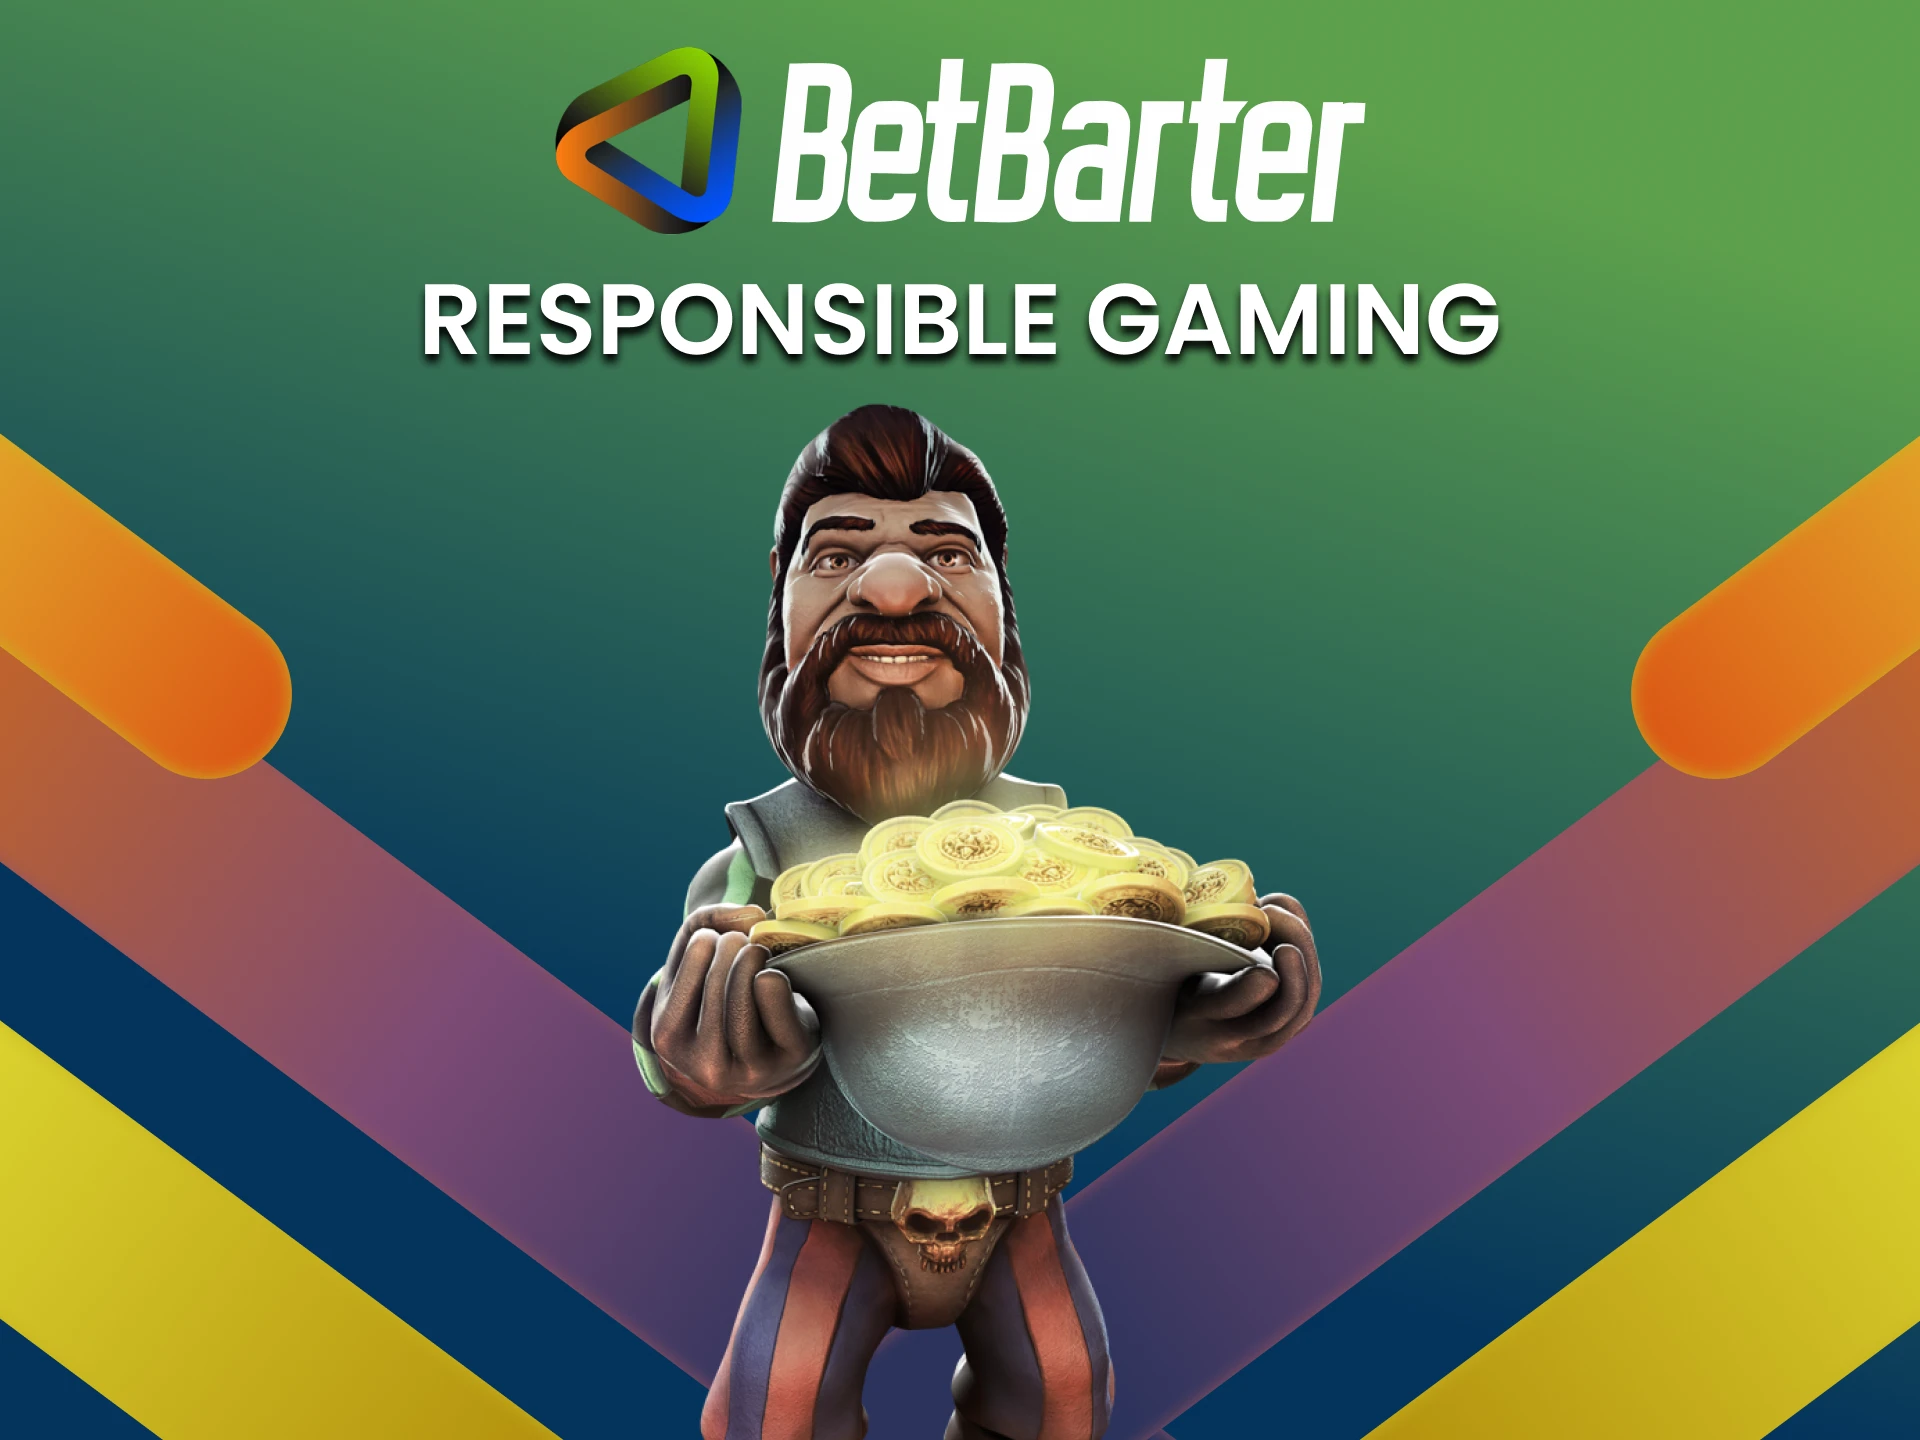 Play and bet responsibly on BetBarter.